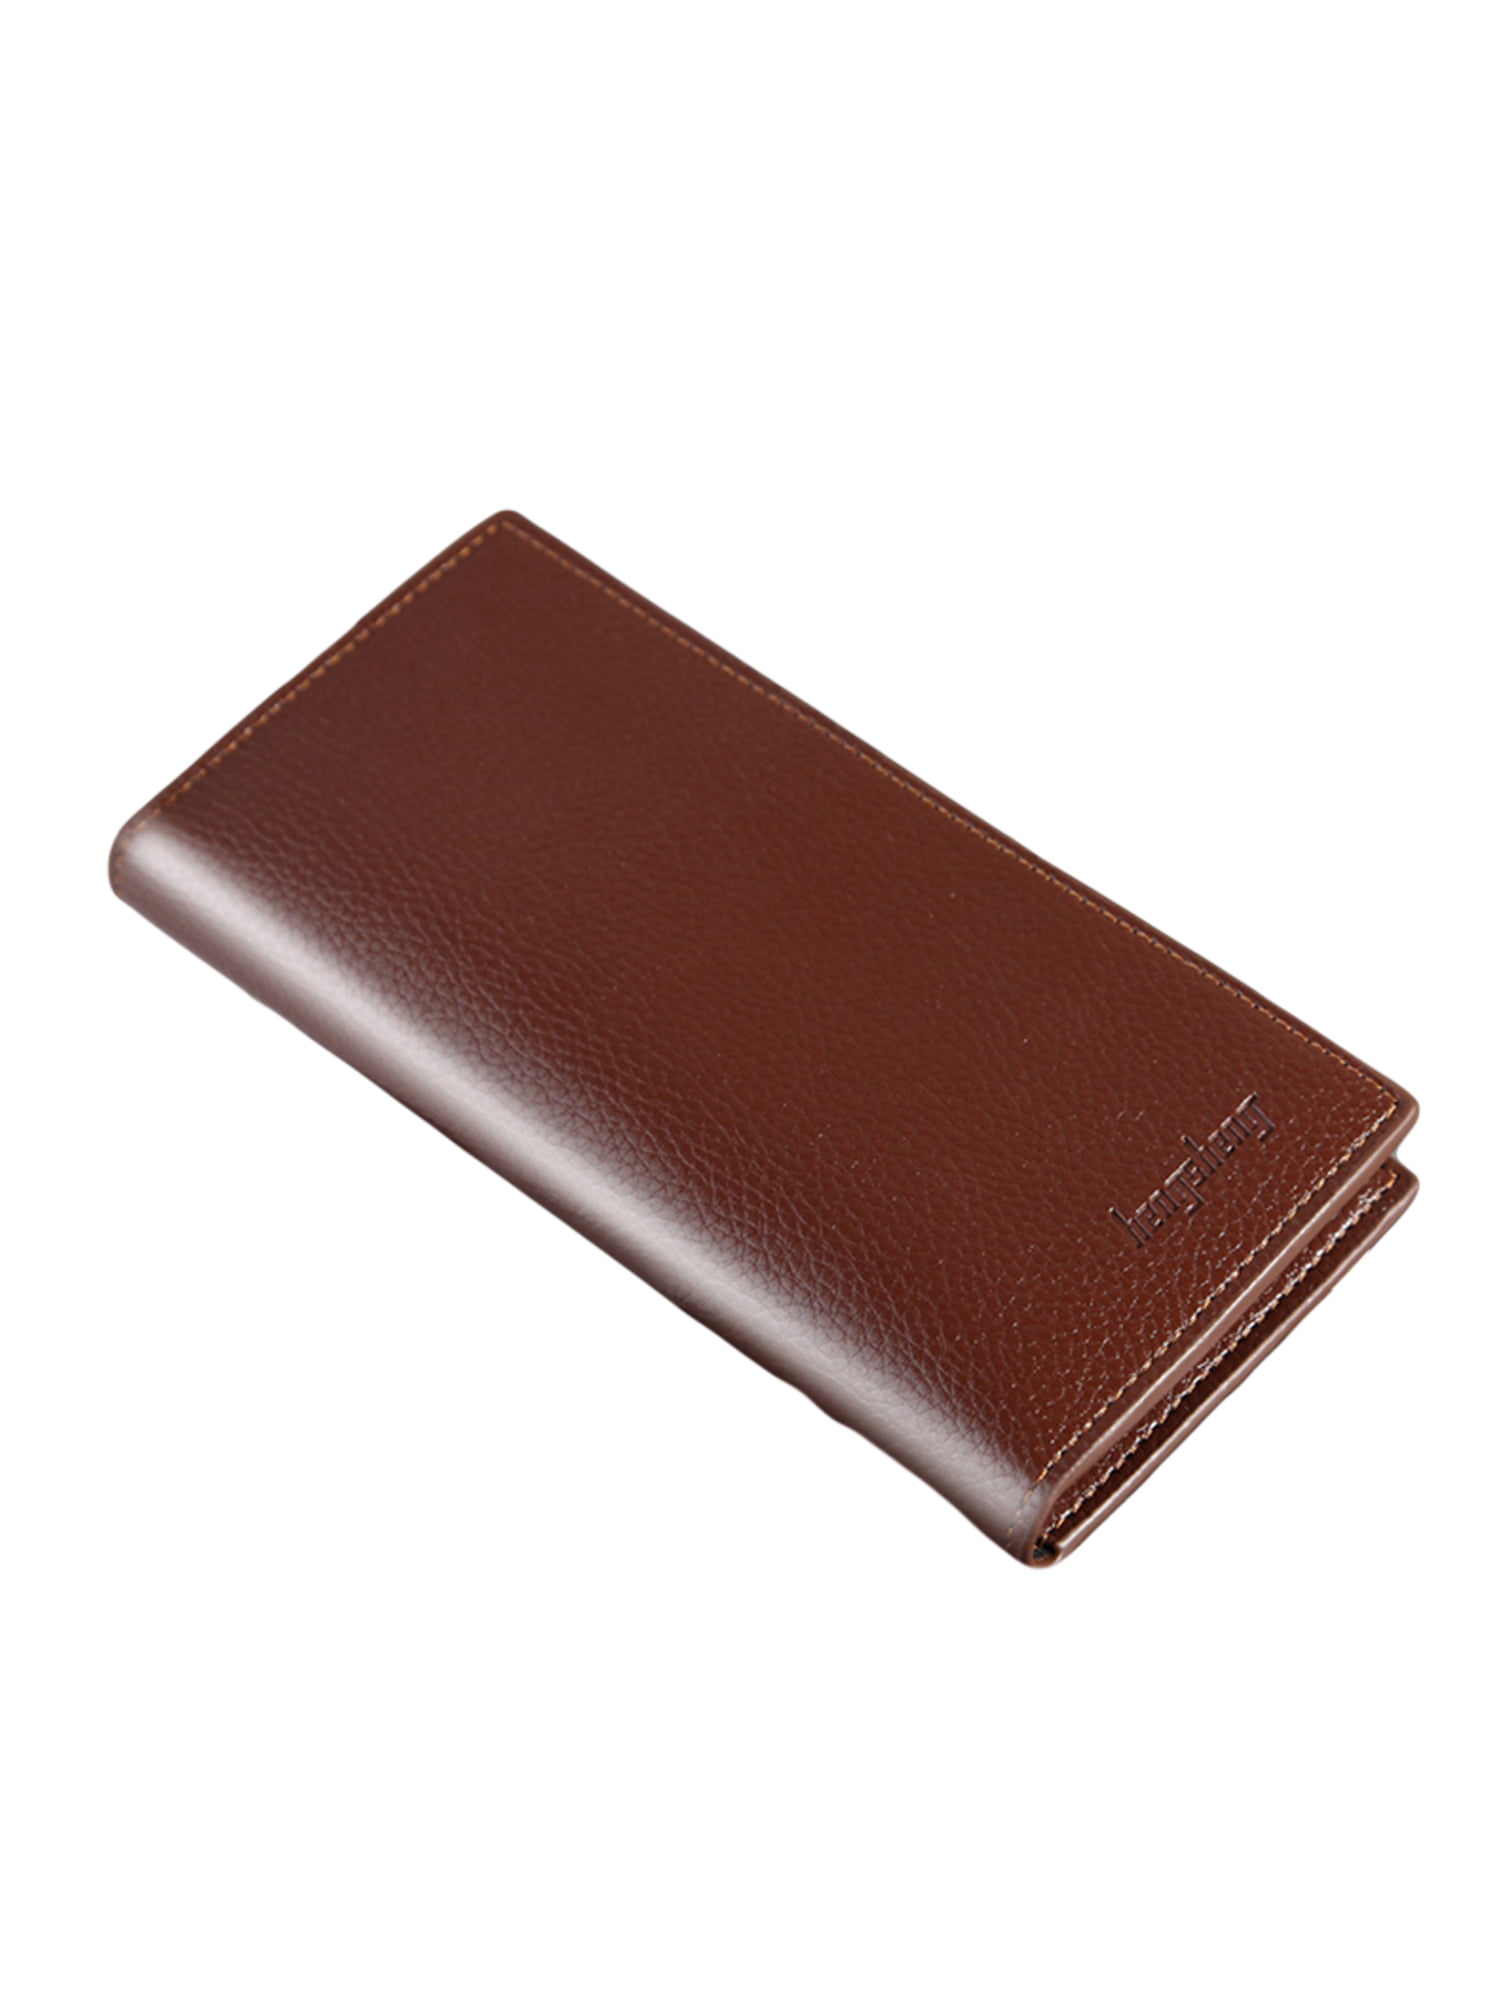 Luxury High Quality Mens Wallet Brown Leather Bifold Credit Card Holder Gift 